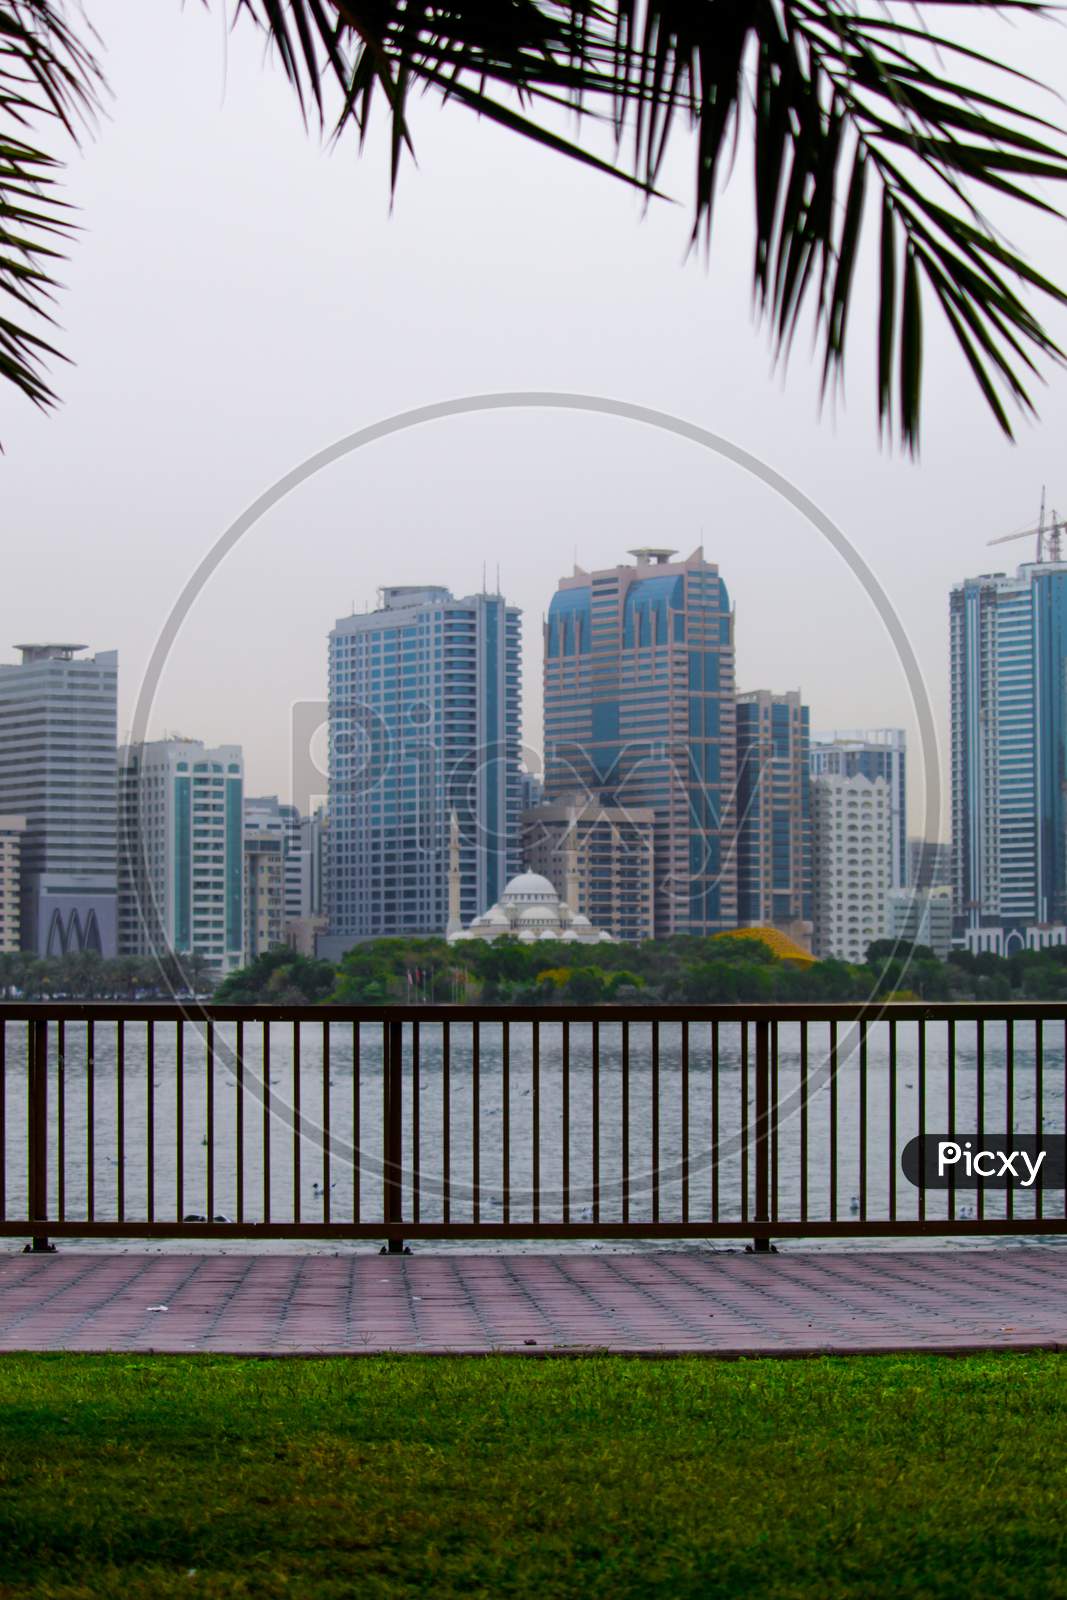 Landscape Of Al-Majaz Waterfront Sharjah And Al Noor Mosque With Other Architecture